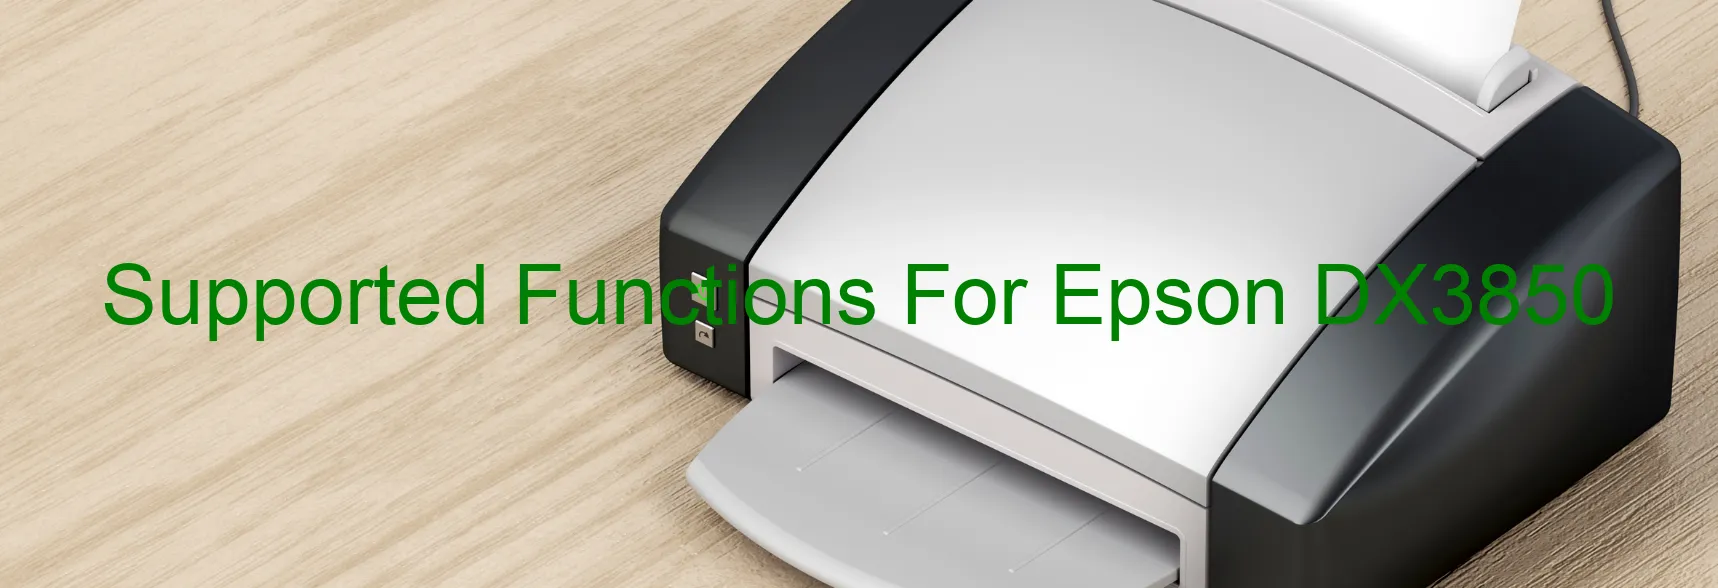 supported-functions-for-epson-dx3850.webp